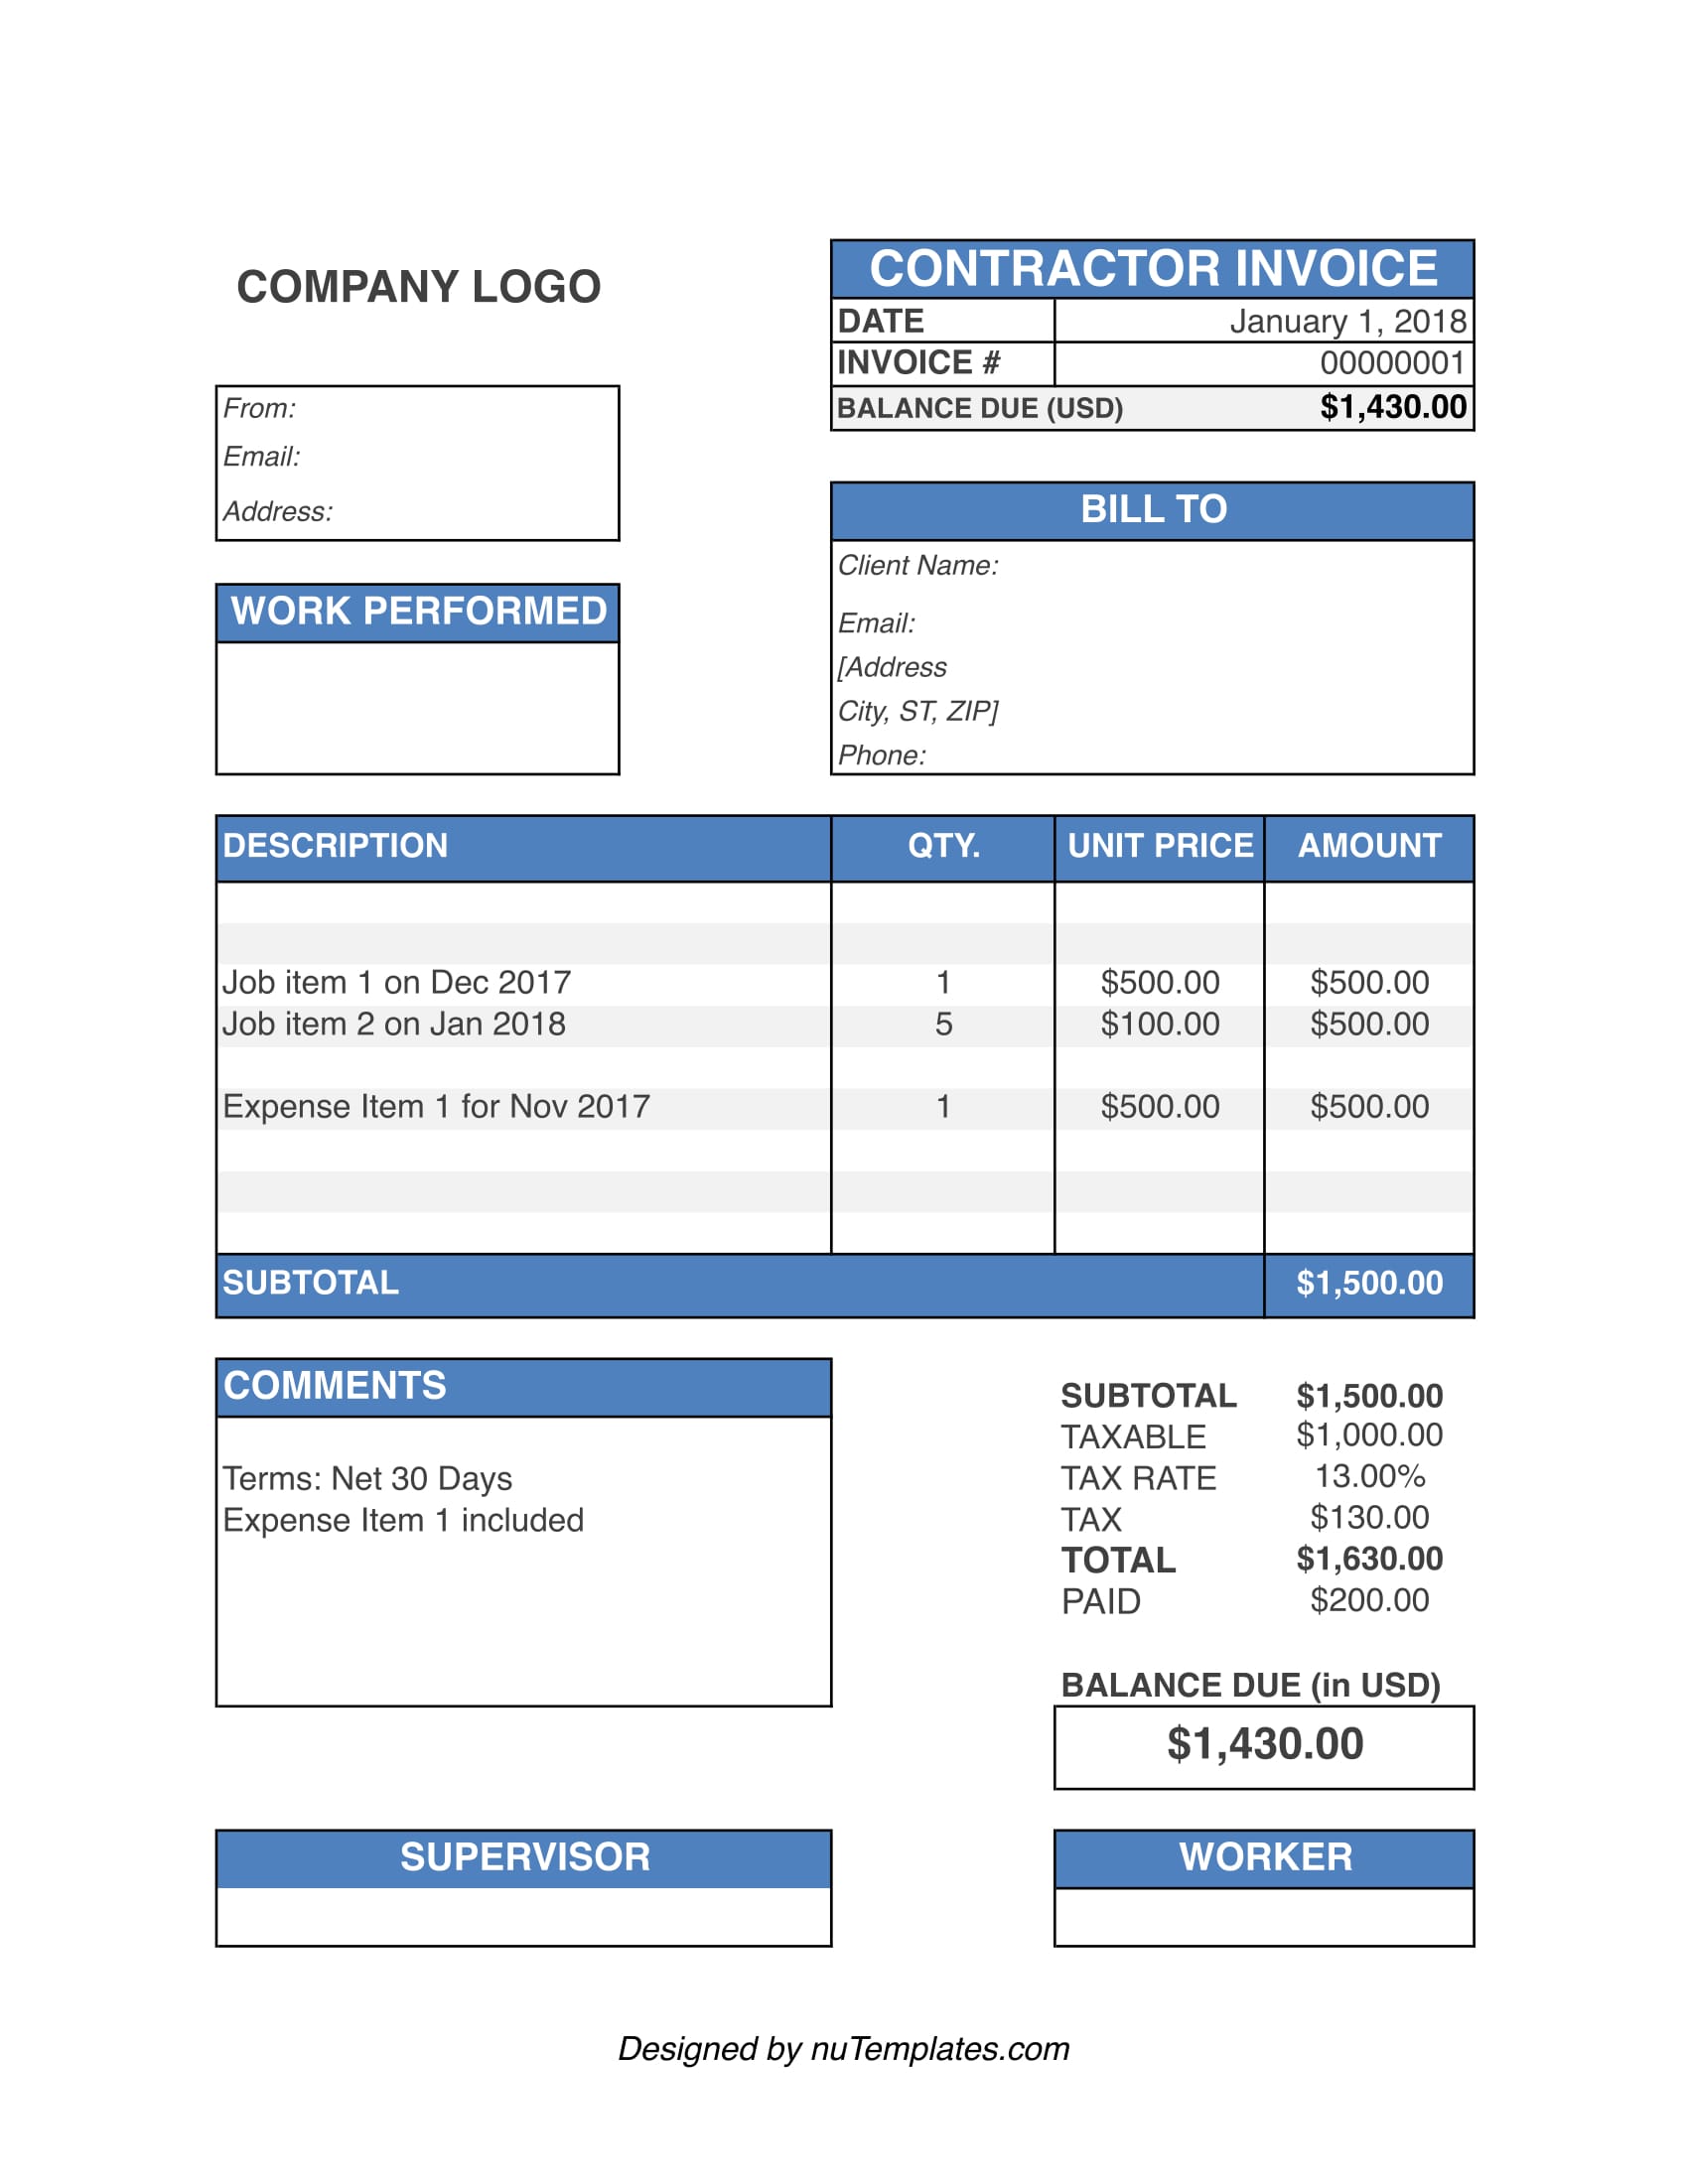 example-of-a-contractors-invoice-best-home-design-ideas